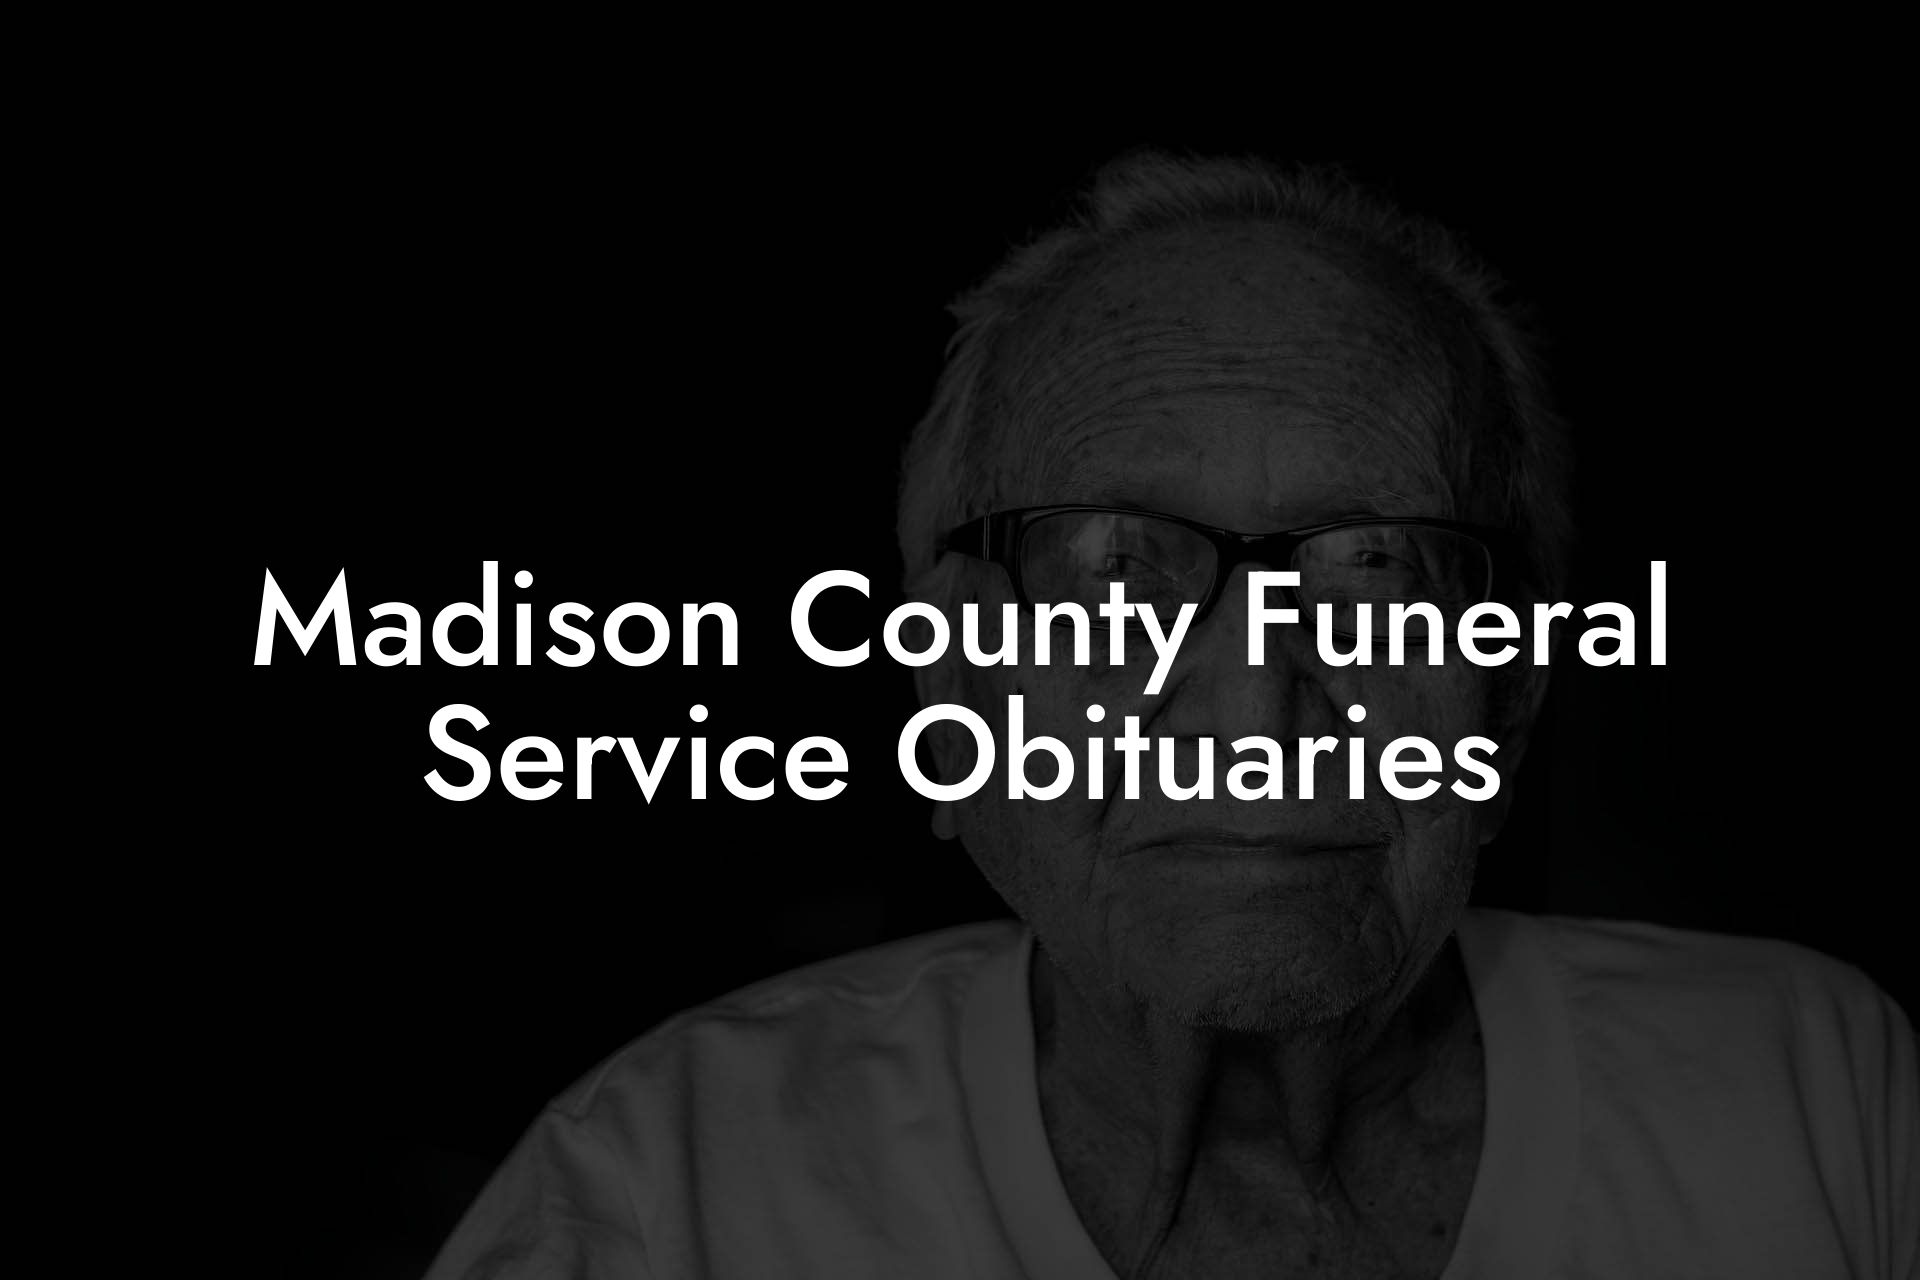 Madison County Funeral Service Obituaries